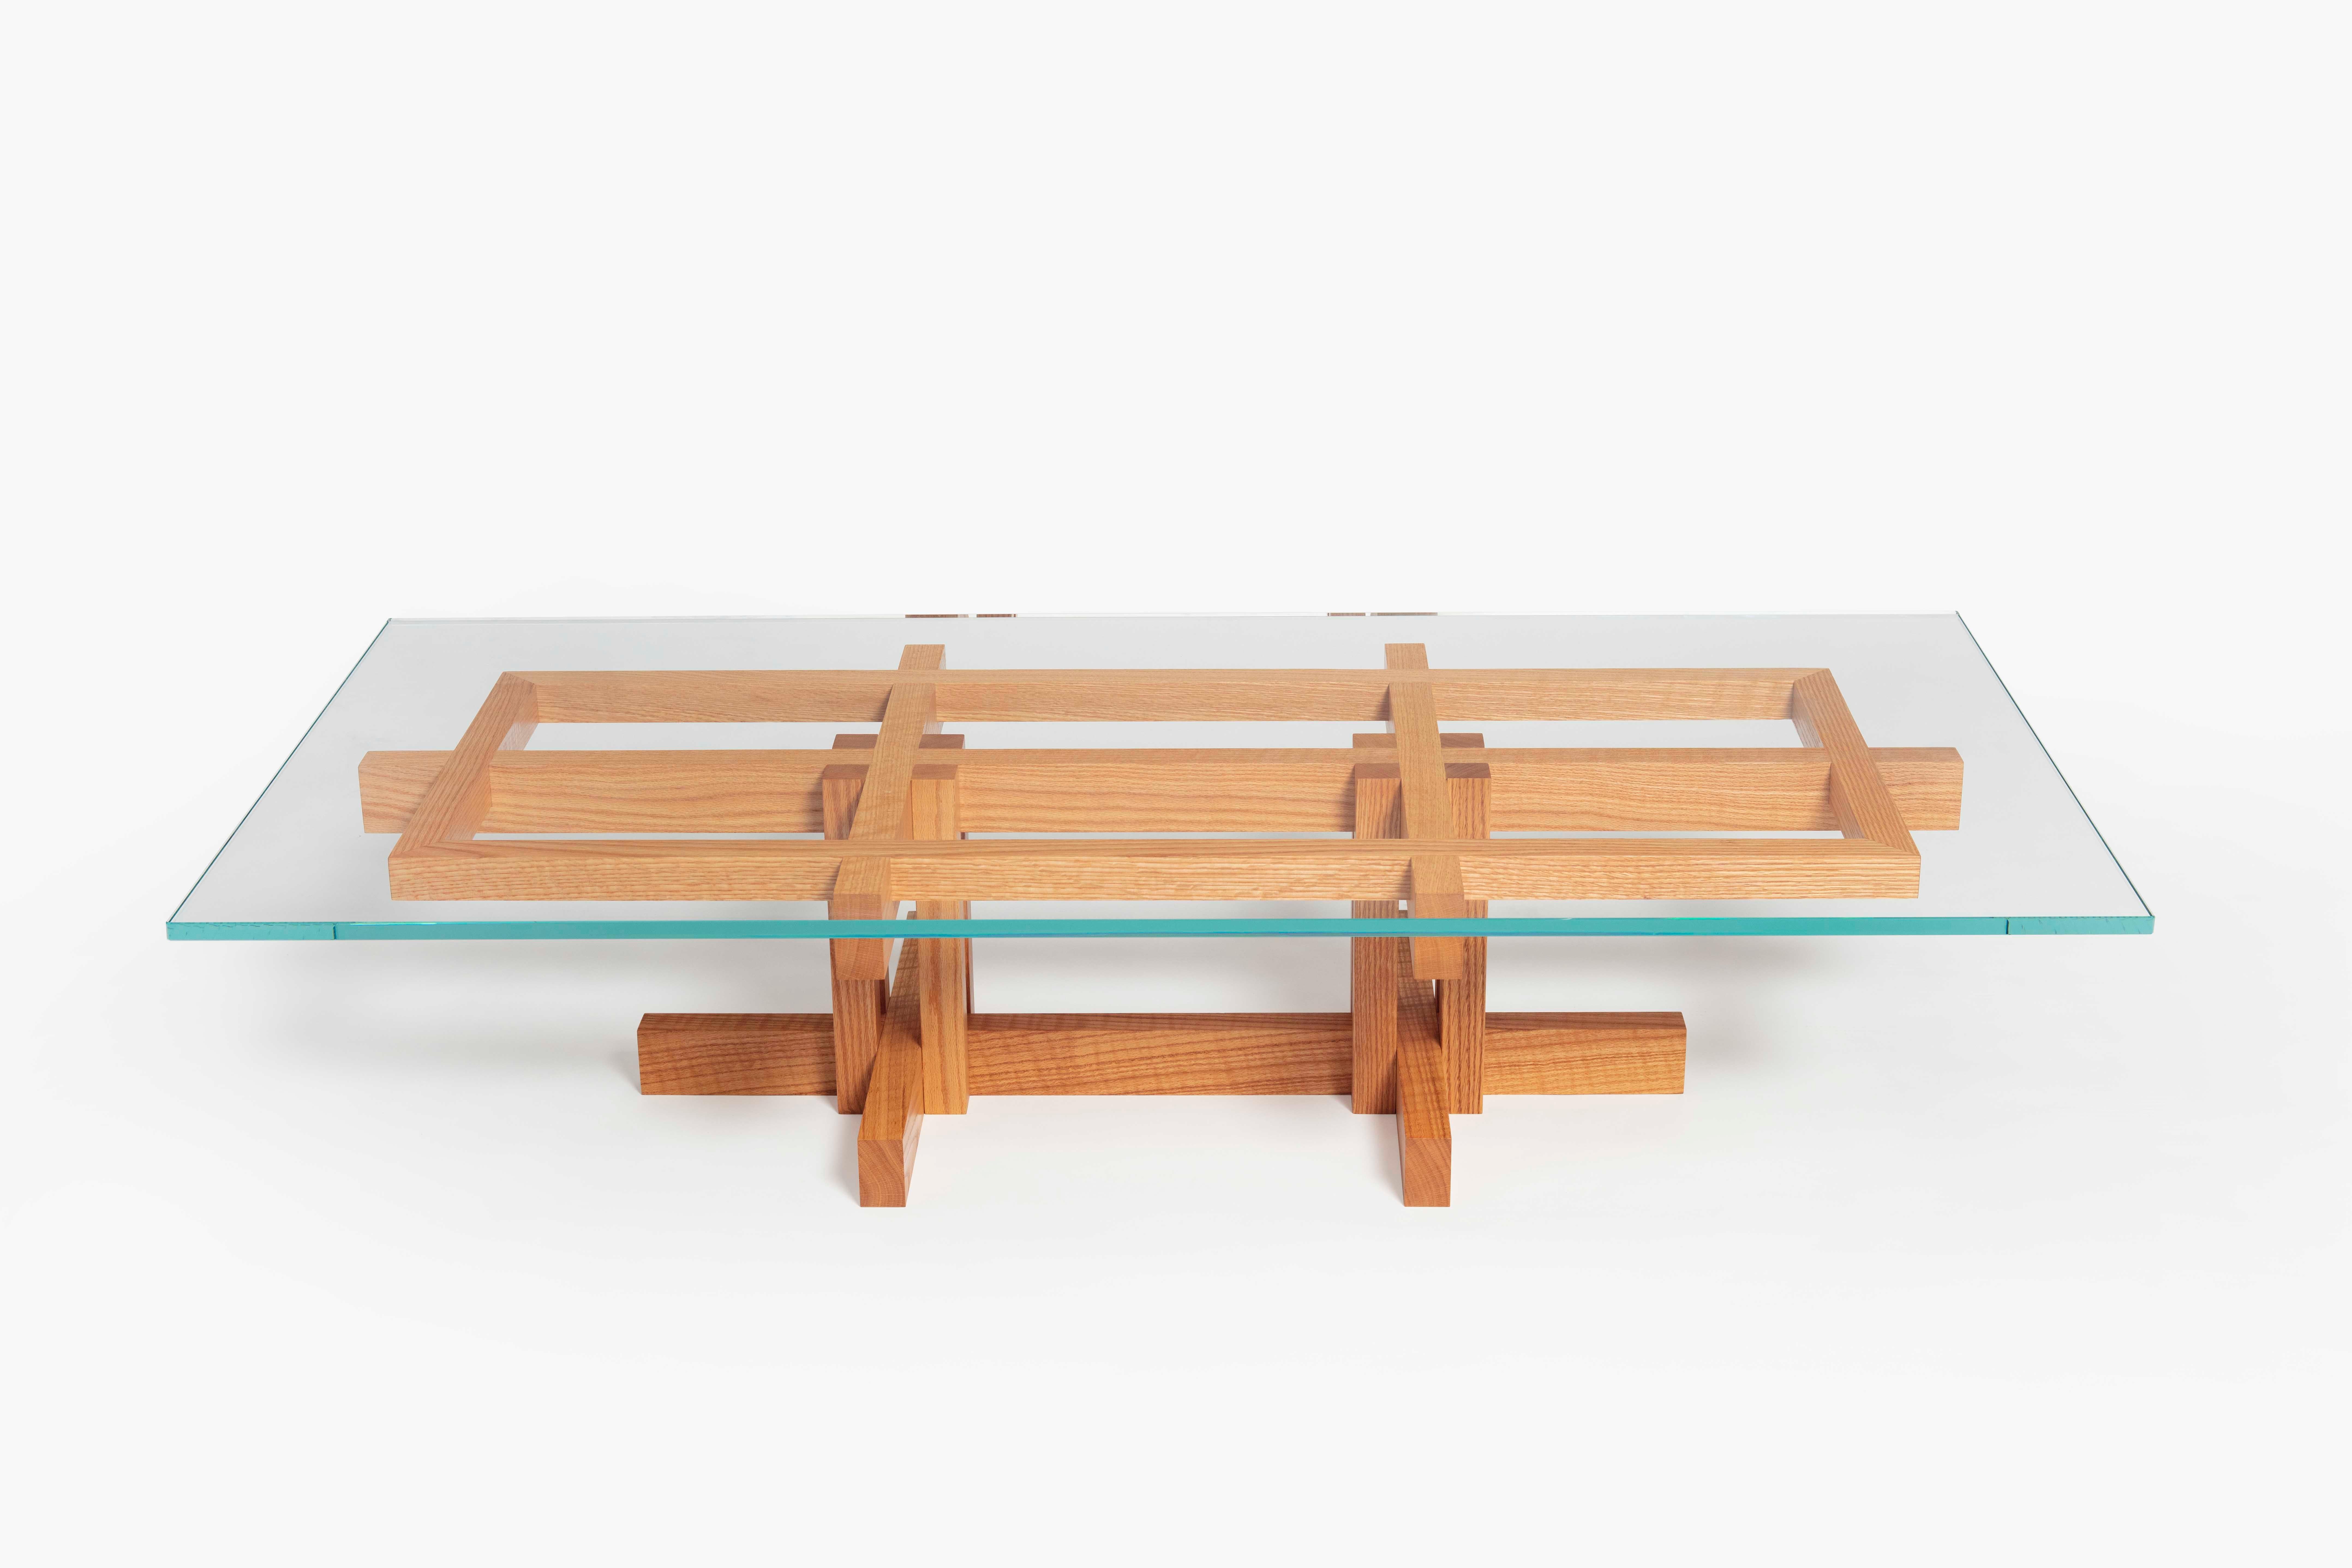 Ray Kappe RK11 coffee table in red oak by Original in Berlin, Germany, 2020

California Modernism is synonymous with sophisticated minimal structures, featuring open plan design and indoor-outdoor living, inspired by traditional Japanese